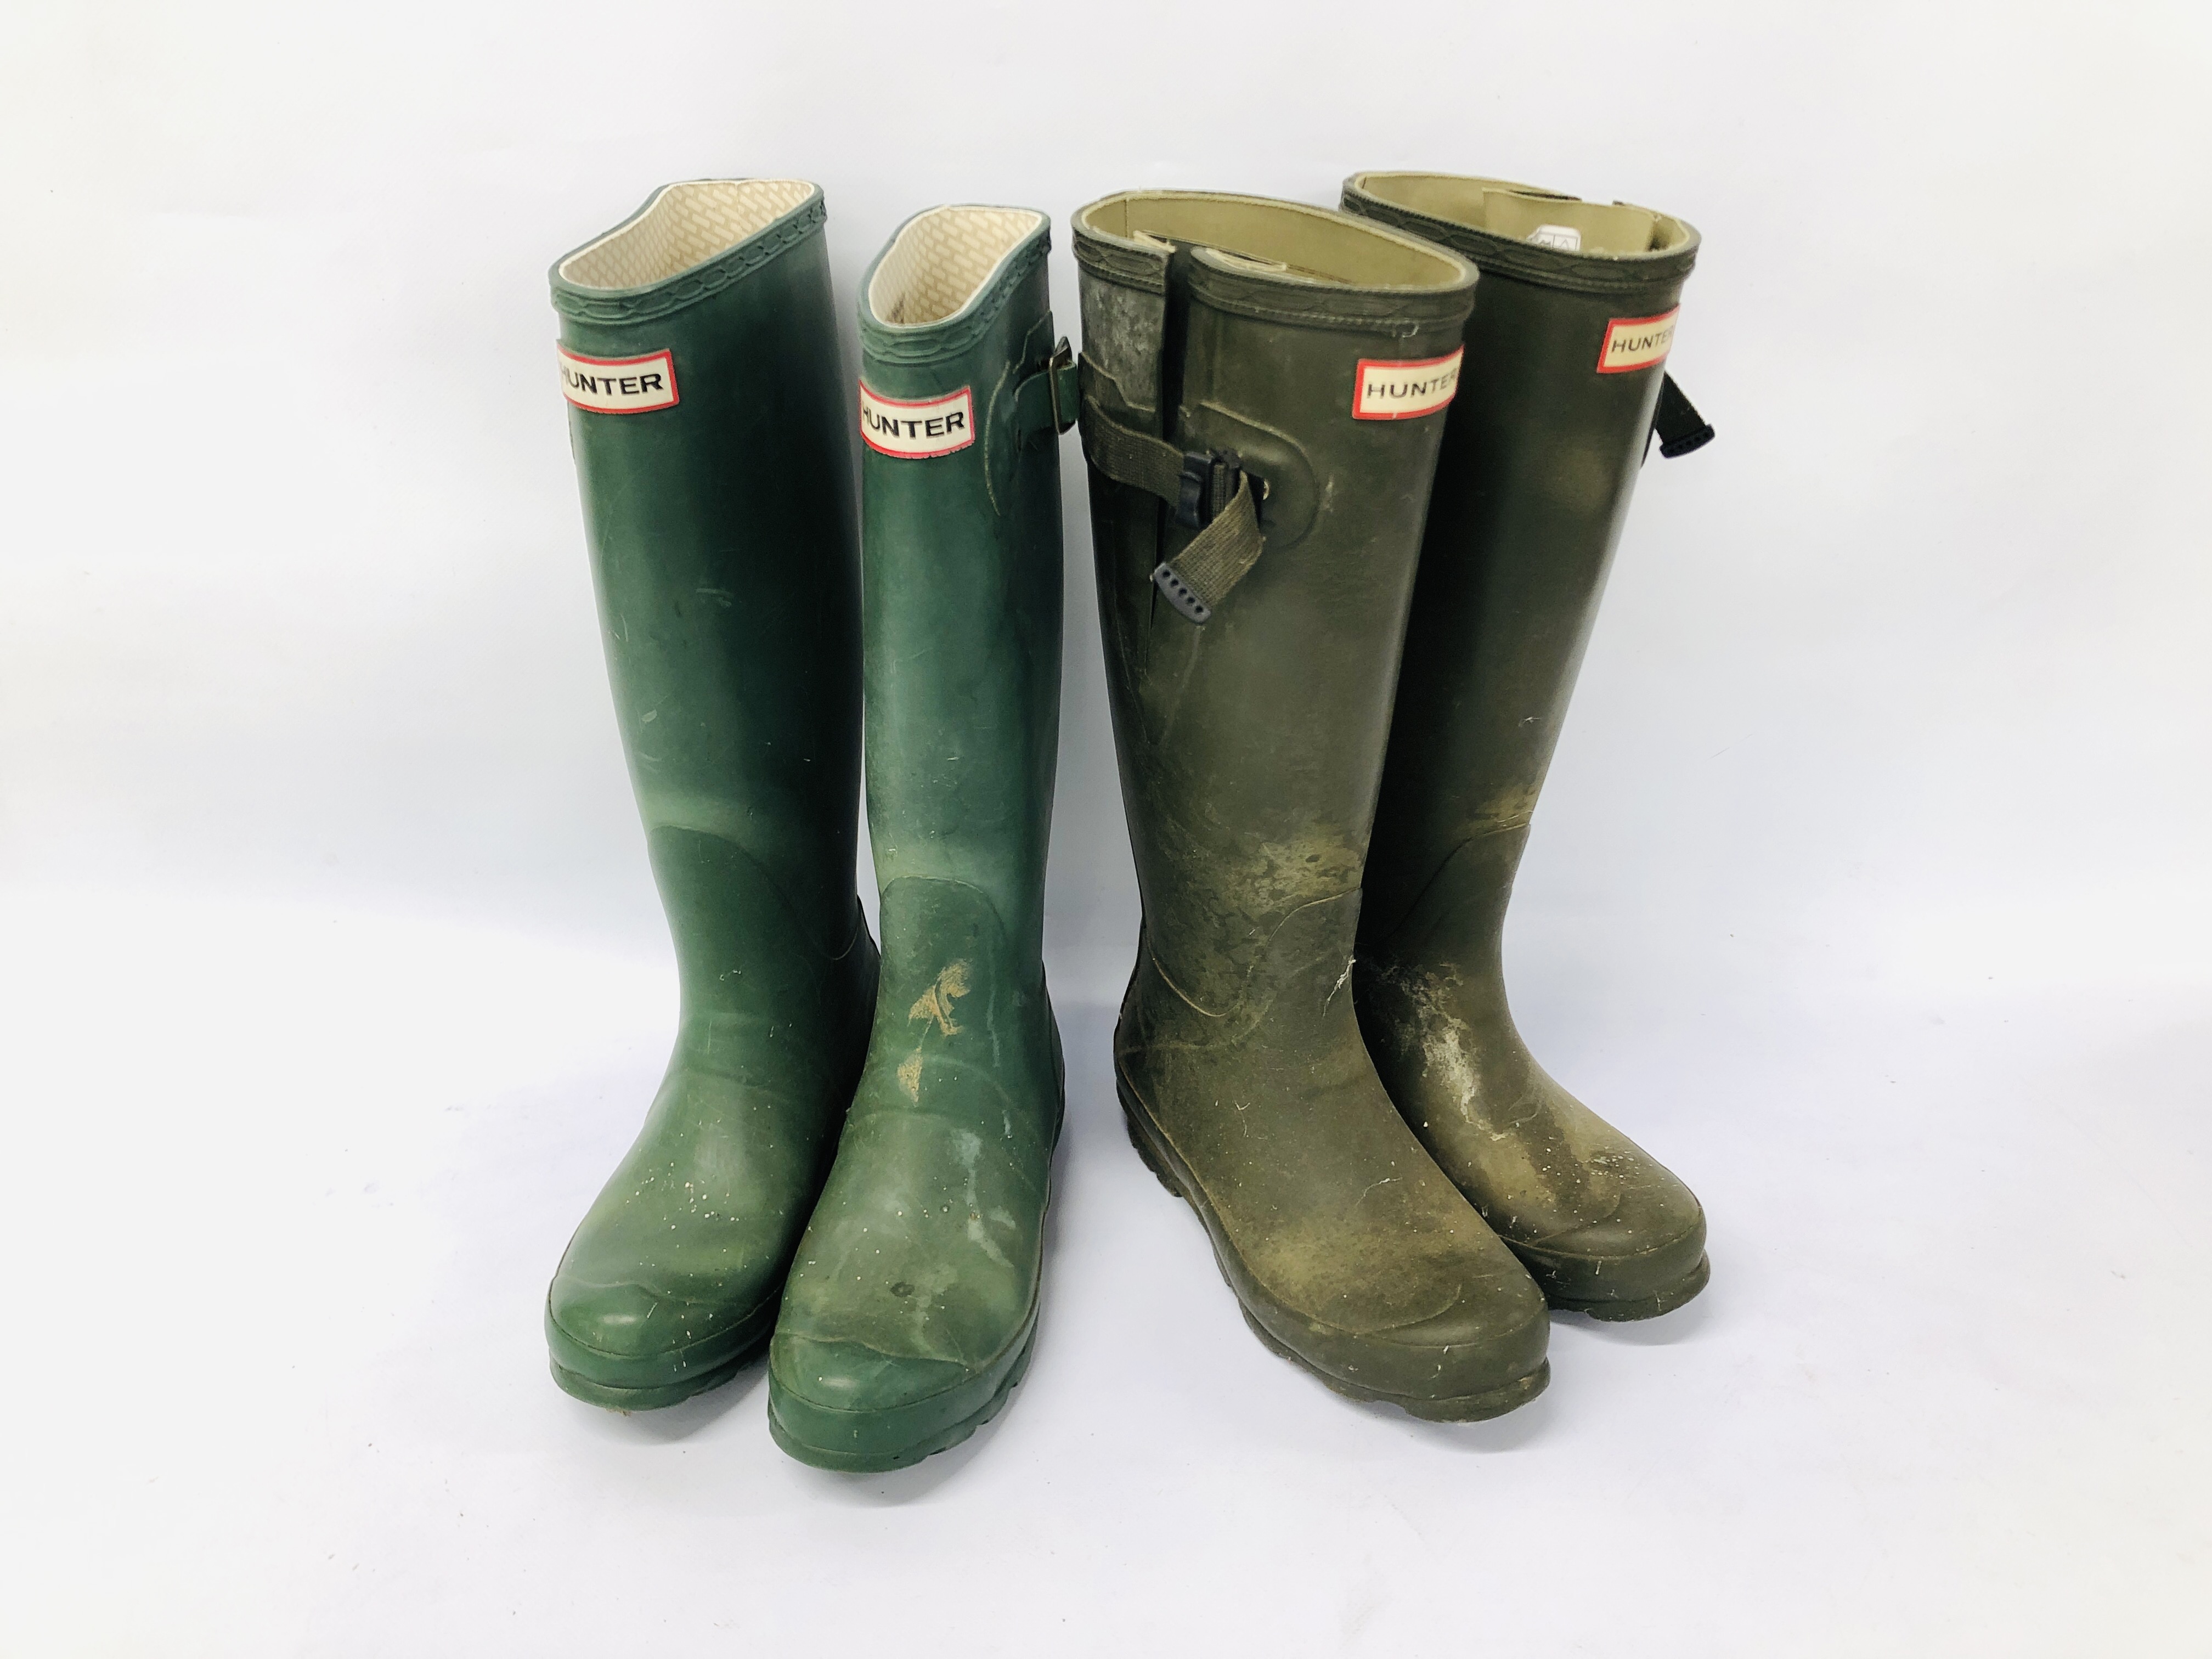 2 X PAIRS OF HUNTER LADIES WELLING BOOTS SIZE 4 (USED)